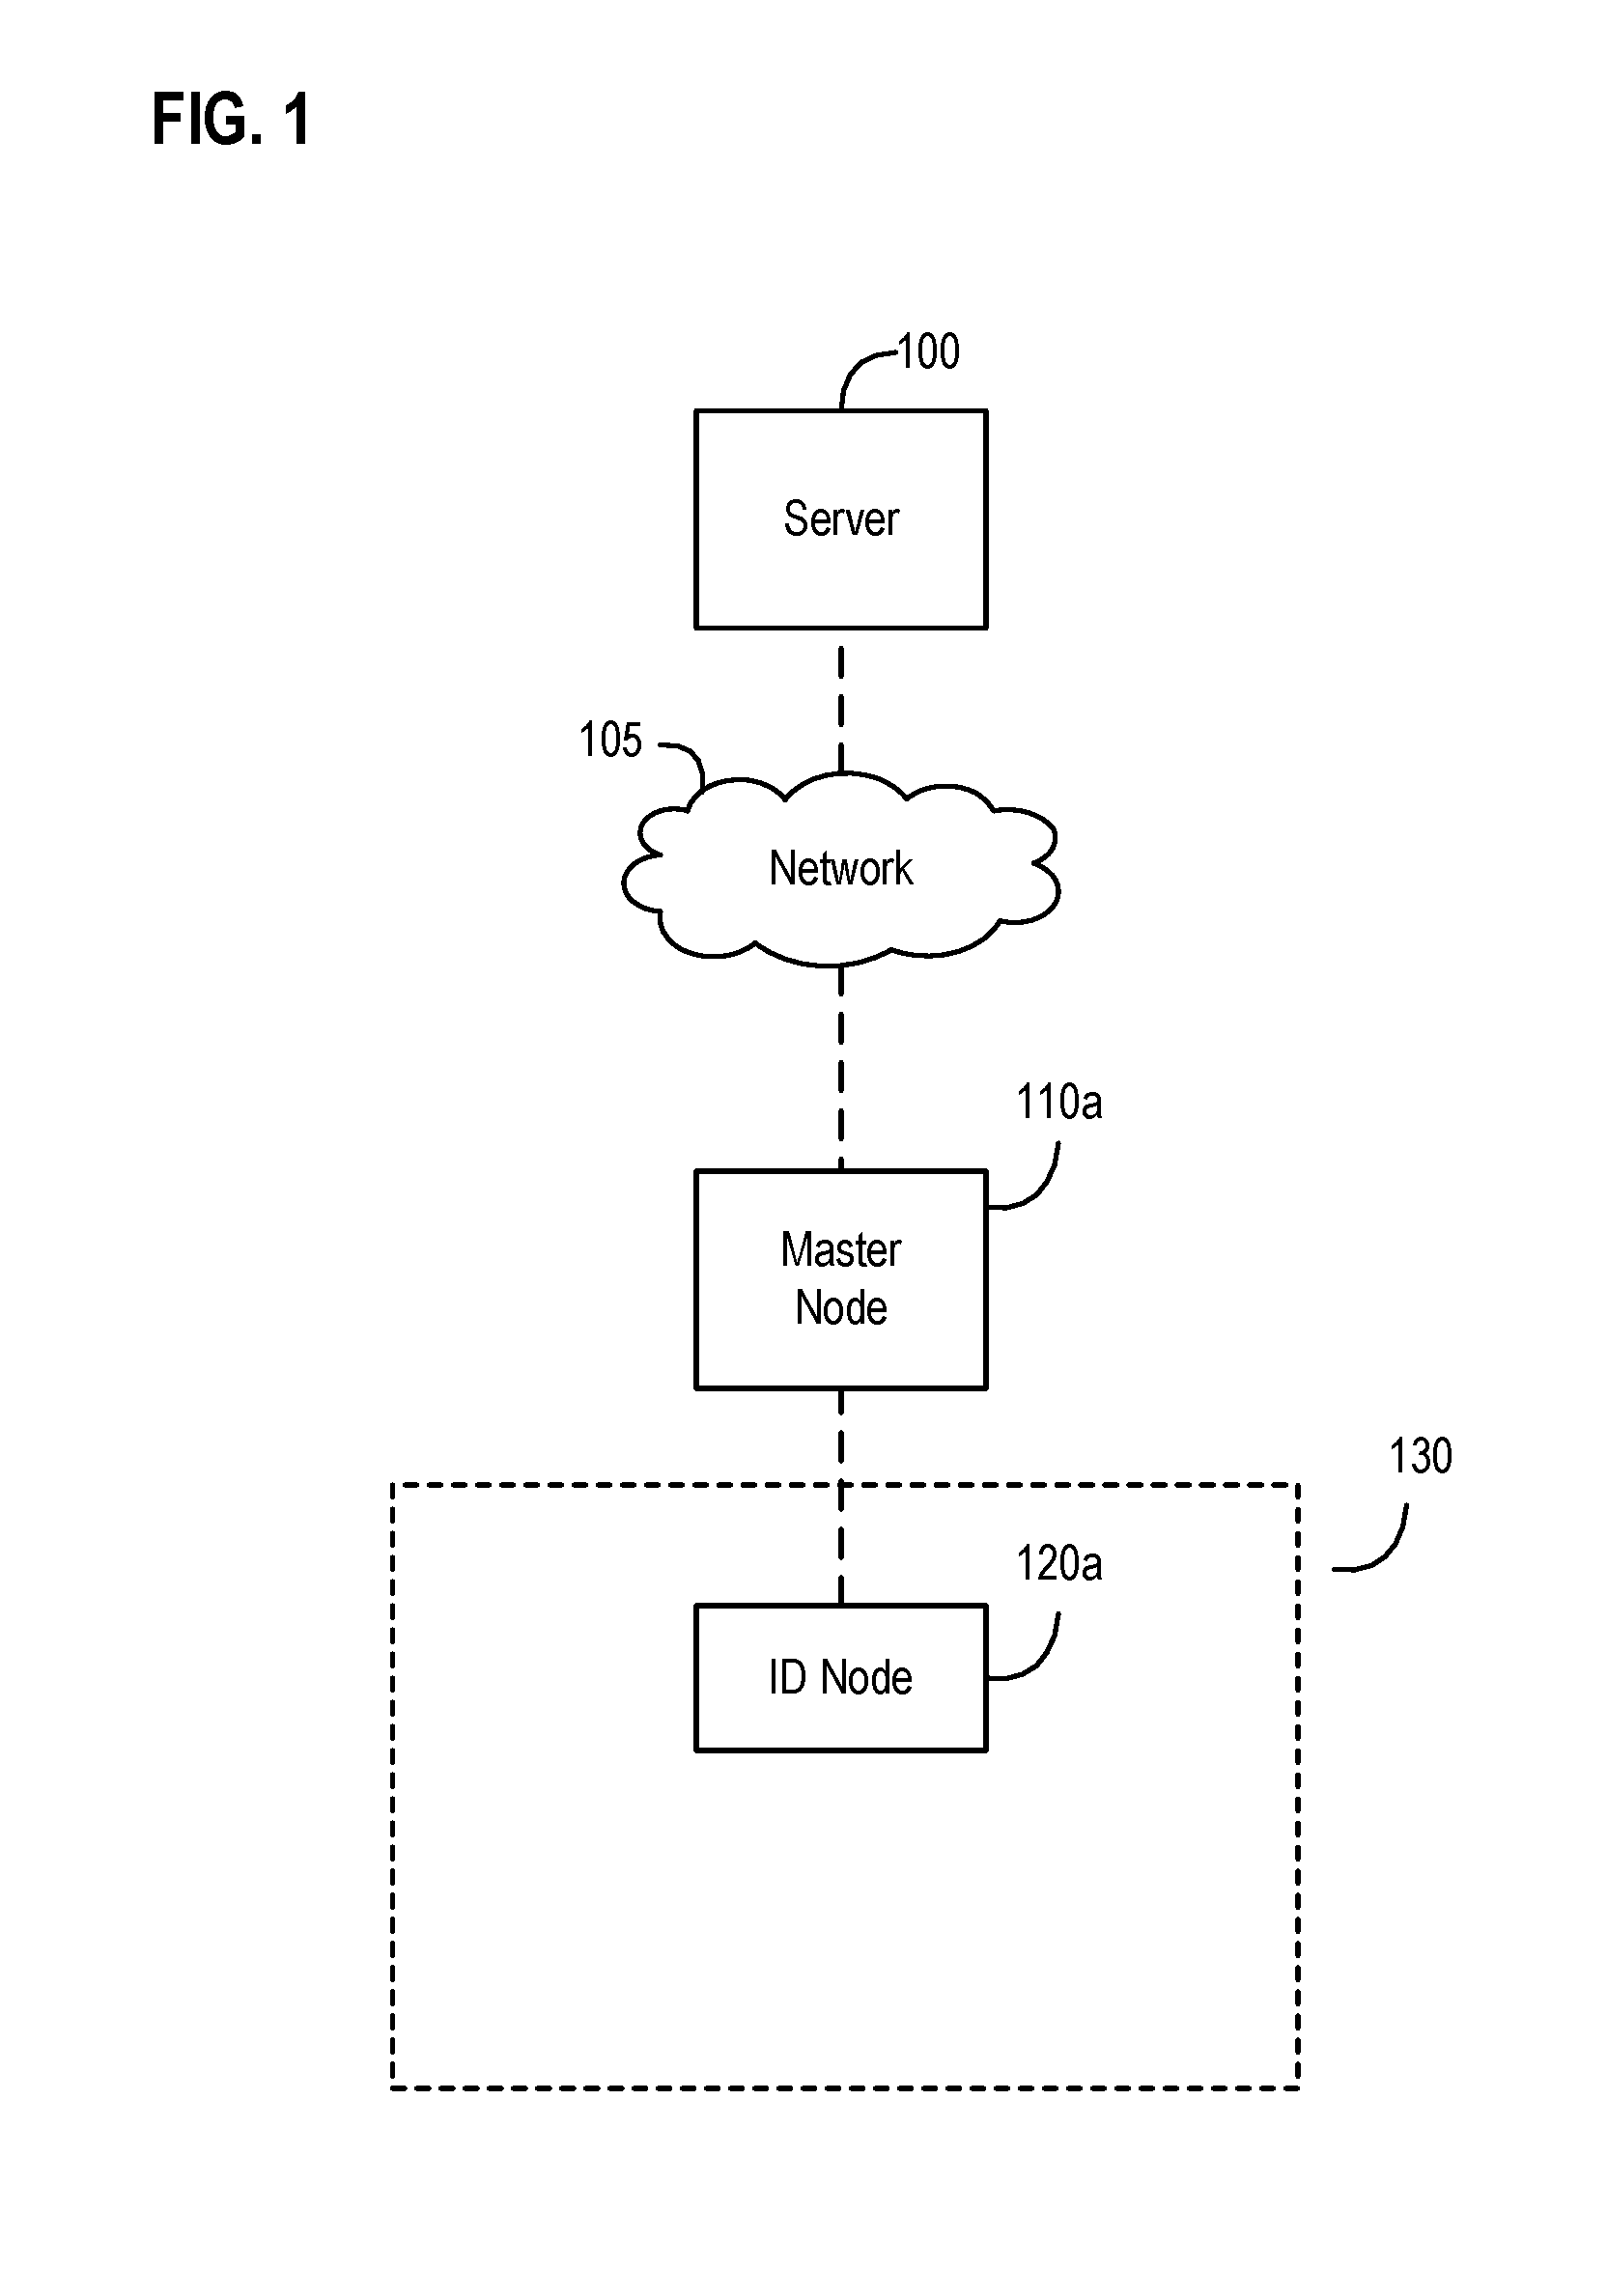 Systems, apparatus, and methods of event monitoring for an event candidate within a wireless node network based upon sighting events, sporadic events, and benchmark checkpoint events